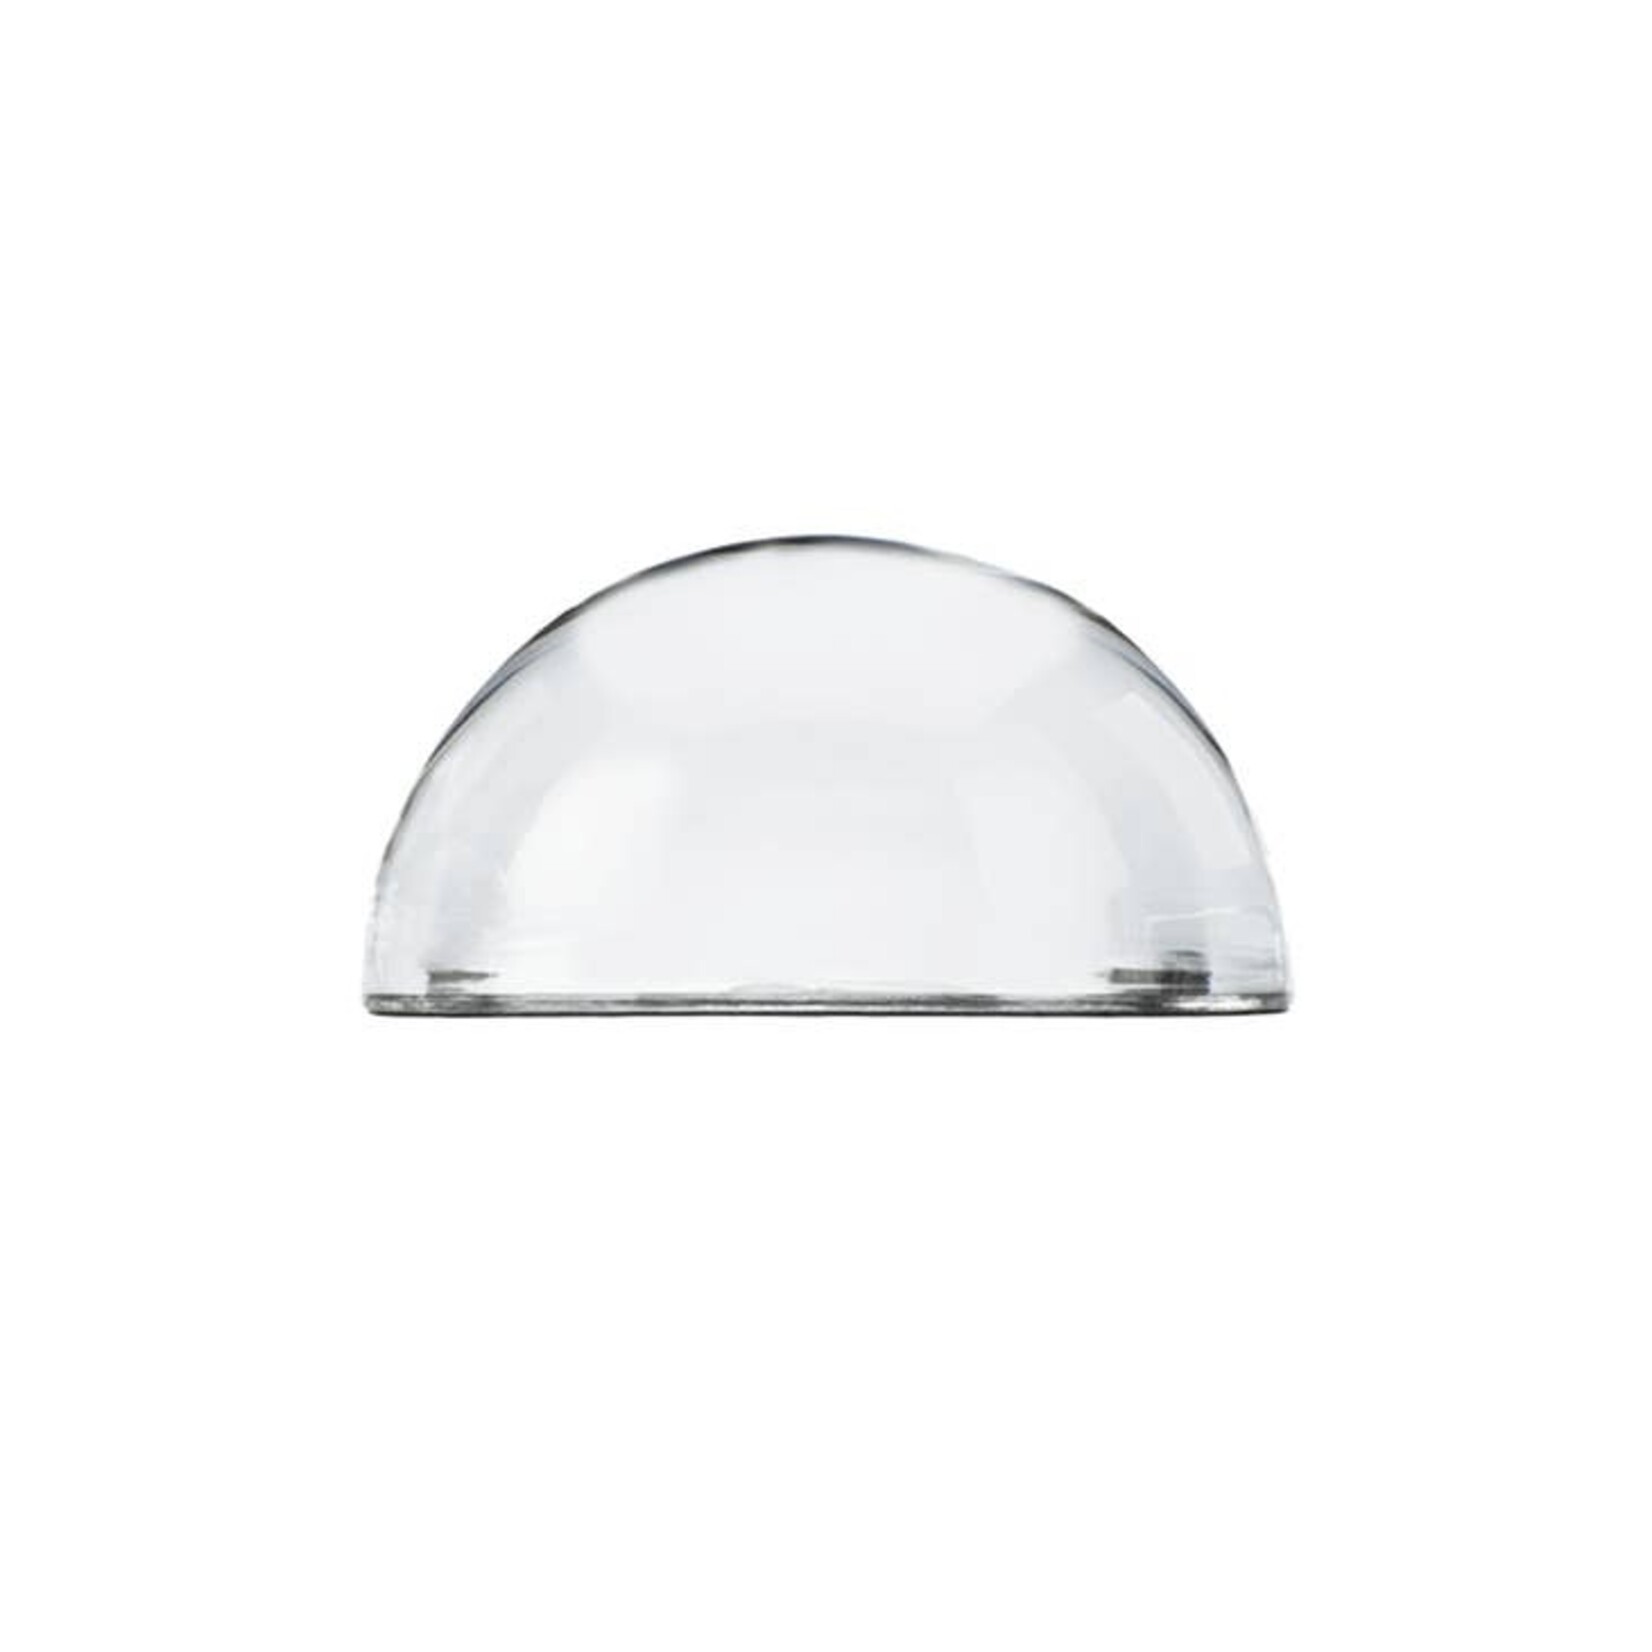 The Best Is Yet To Be Crystal Dome Paperweight